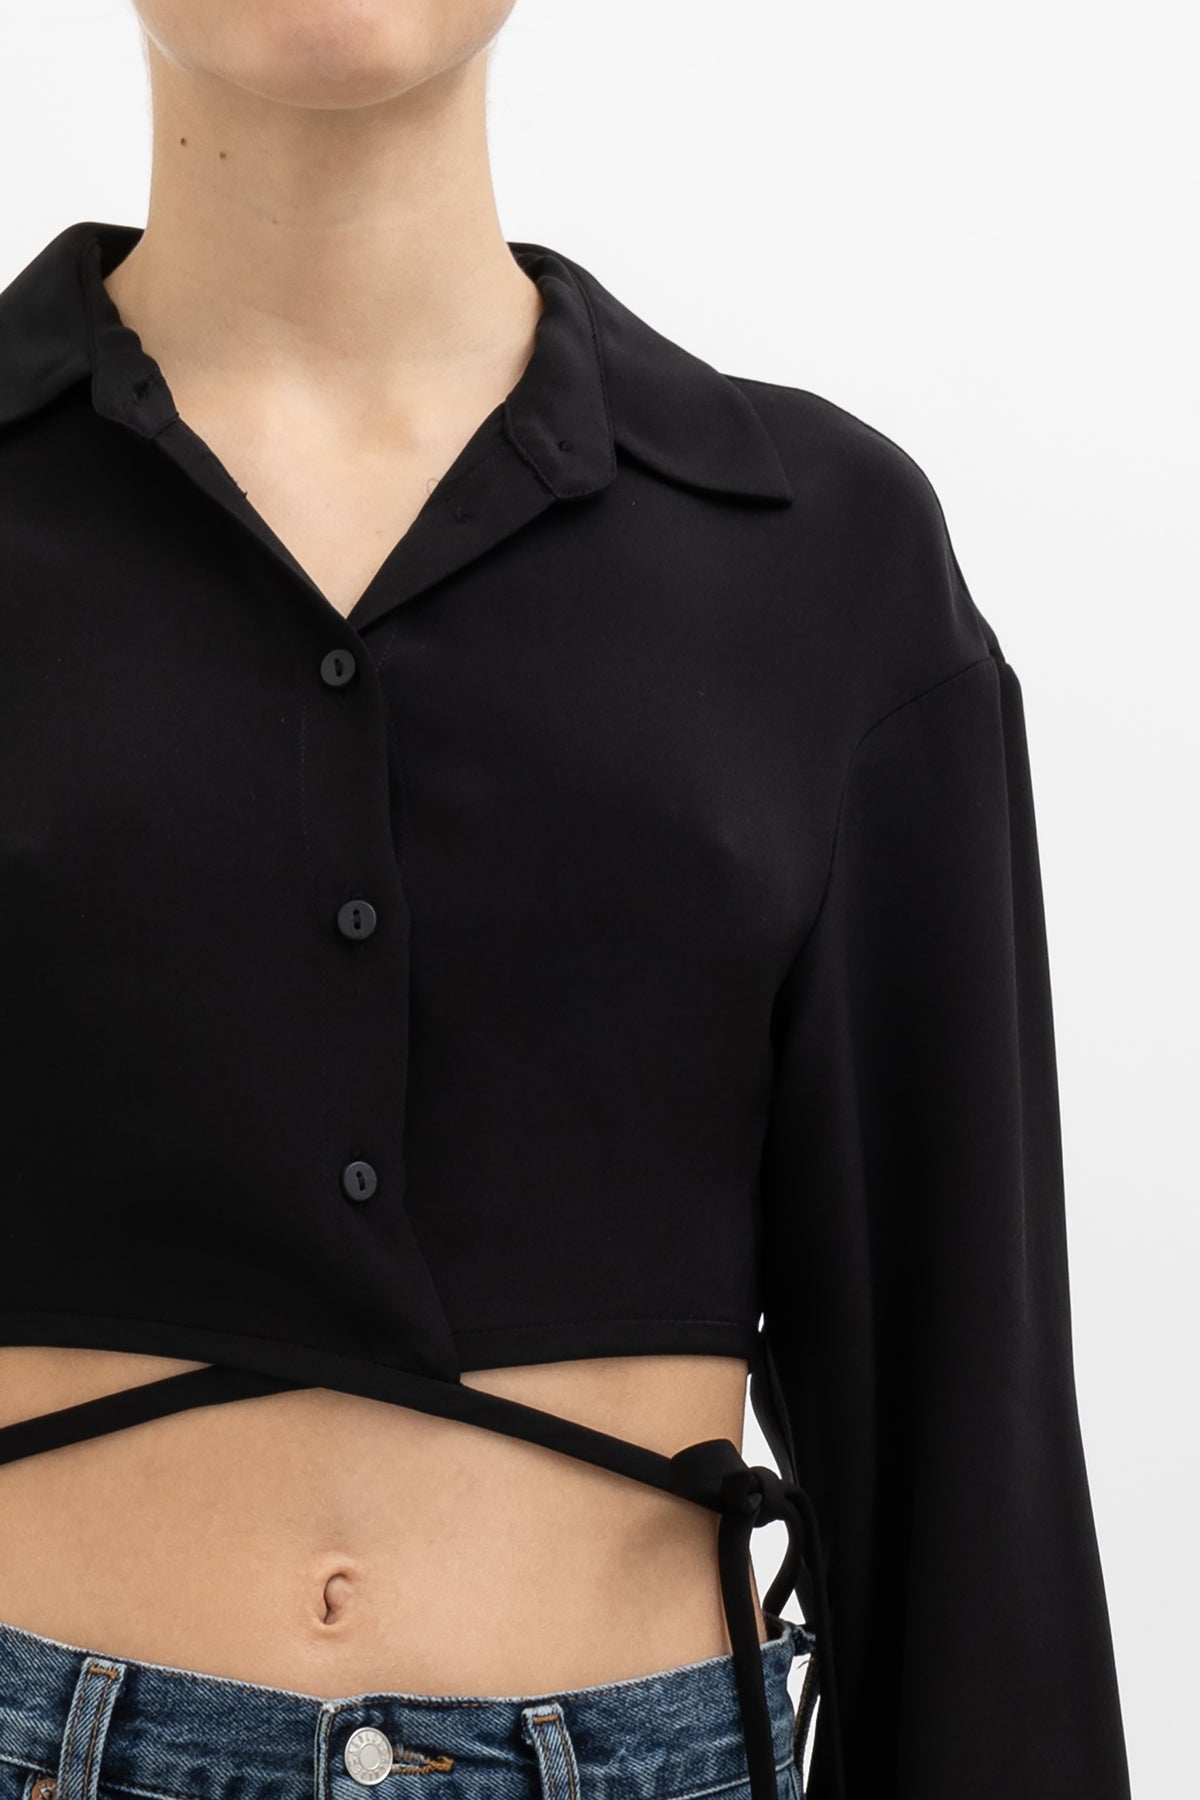 Cropped Wrap Top